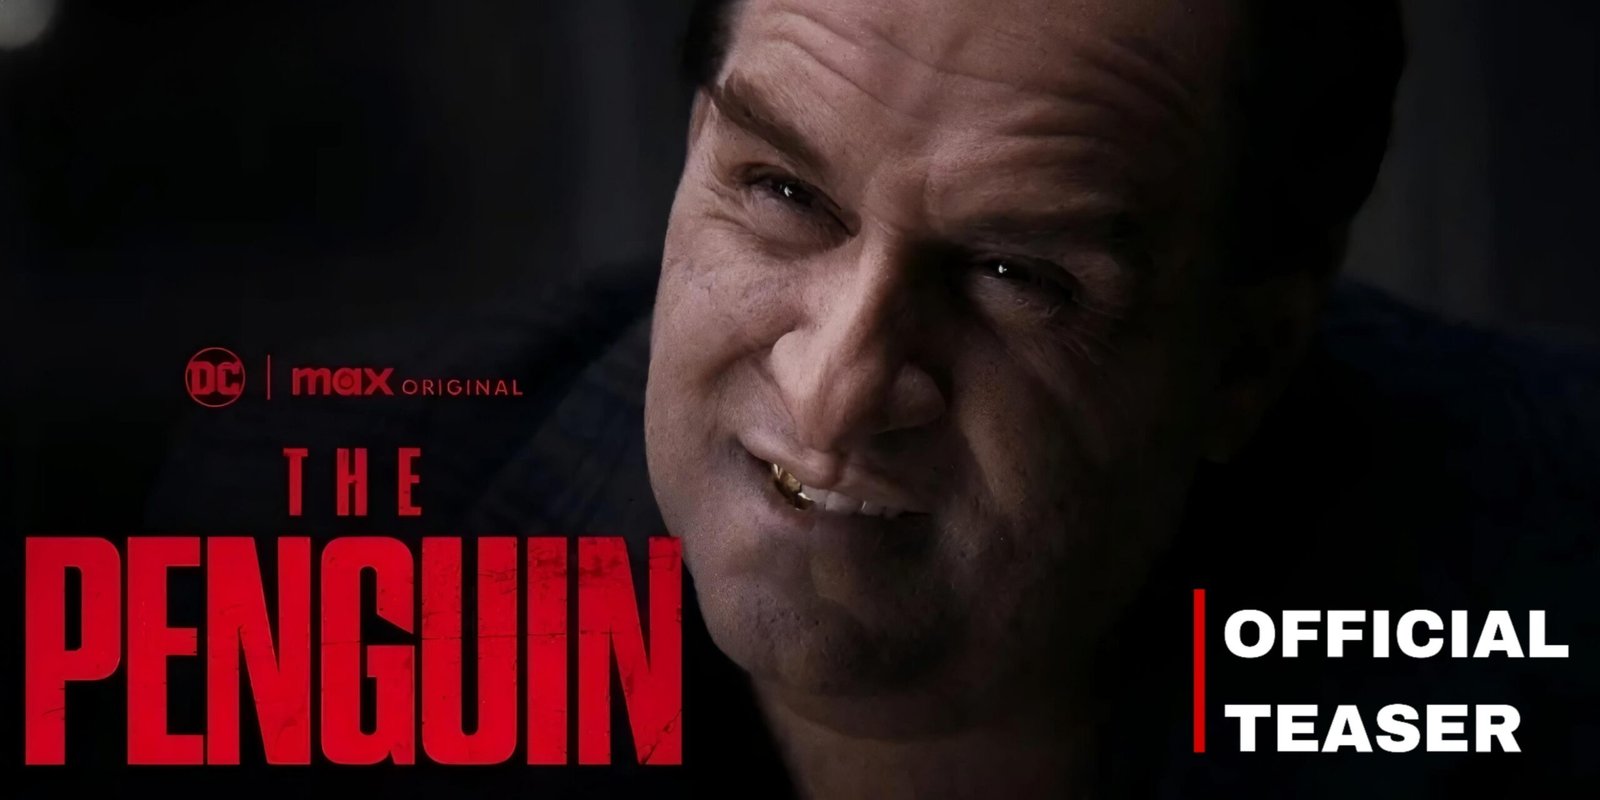 Watch the Official Teaser 2 of “The Penguin”!